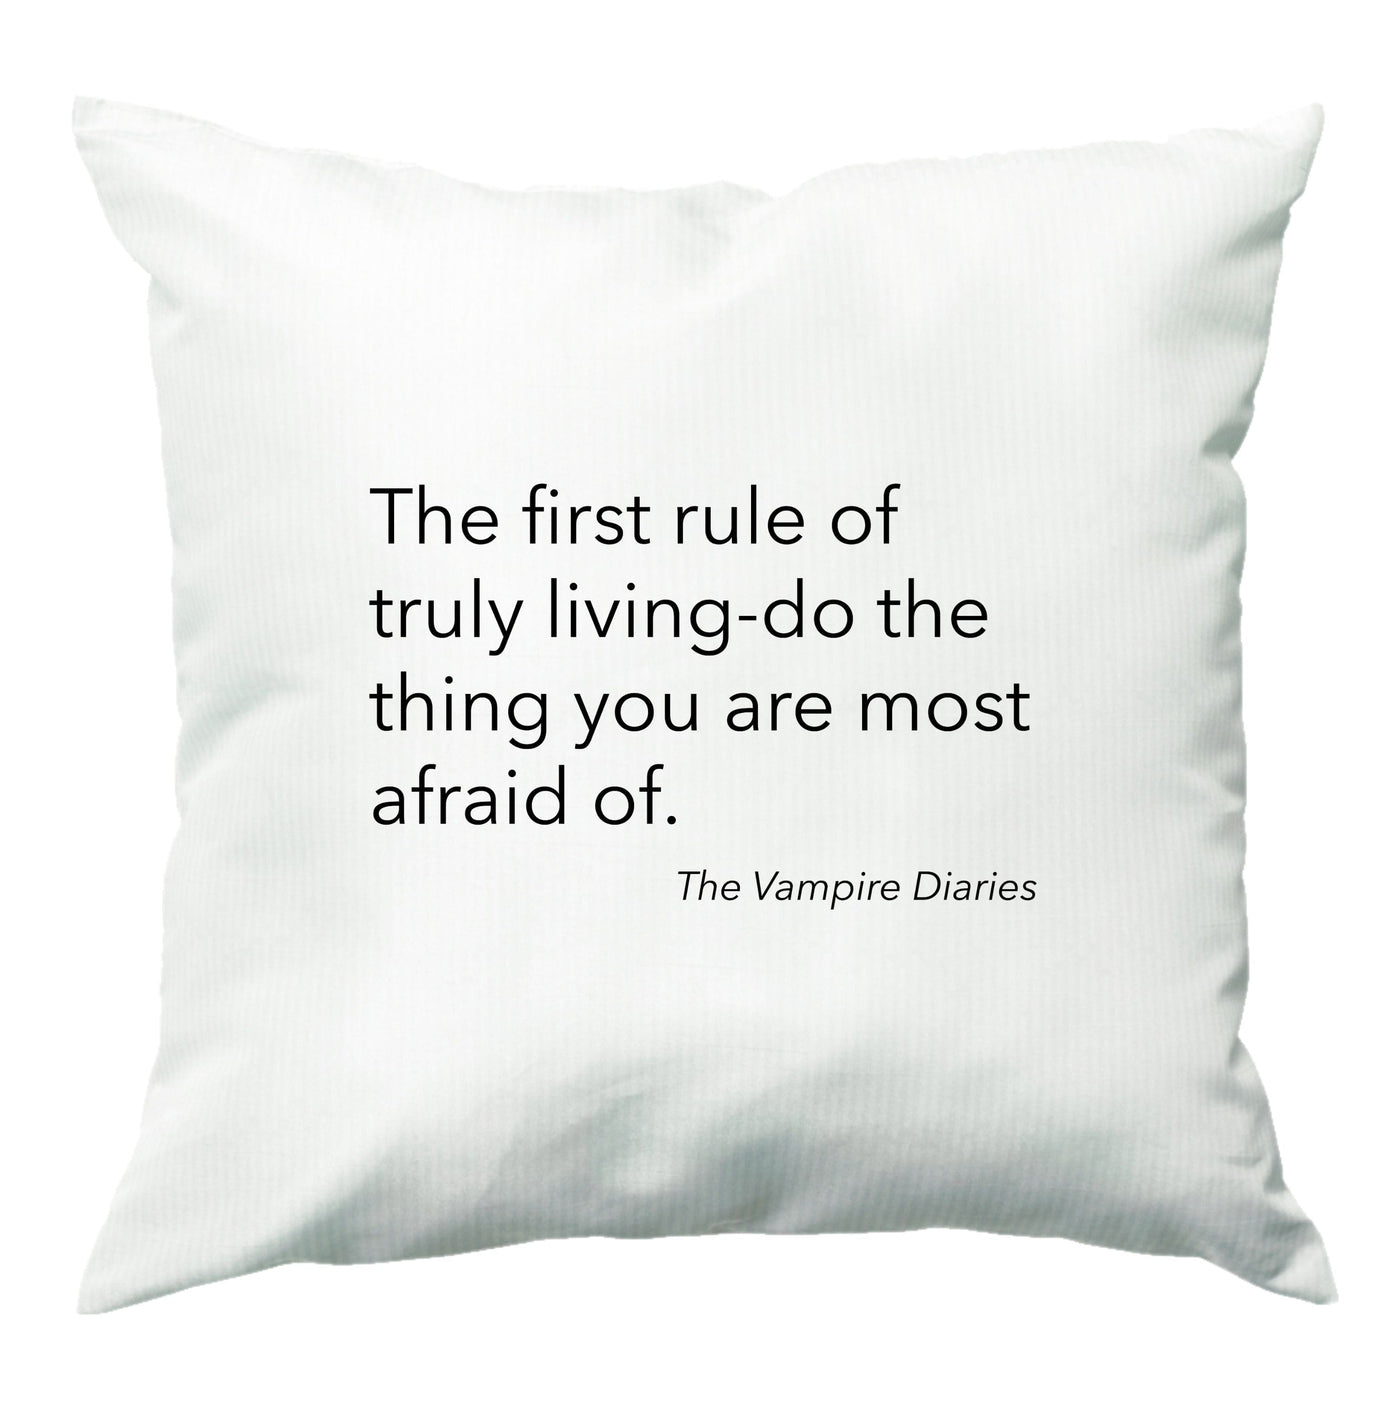 The First Rule Of Truly Living - Vampire Diaries Cushion